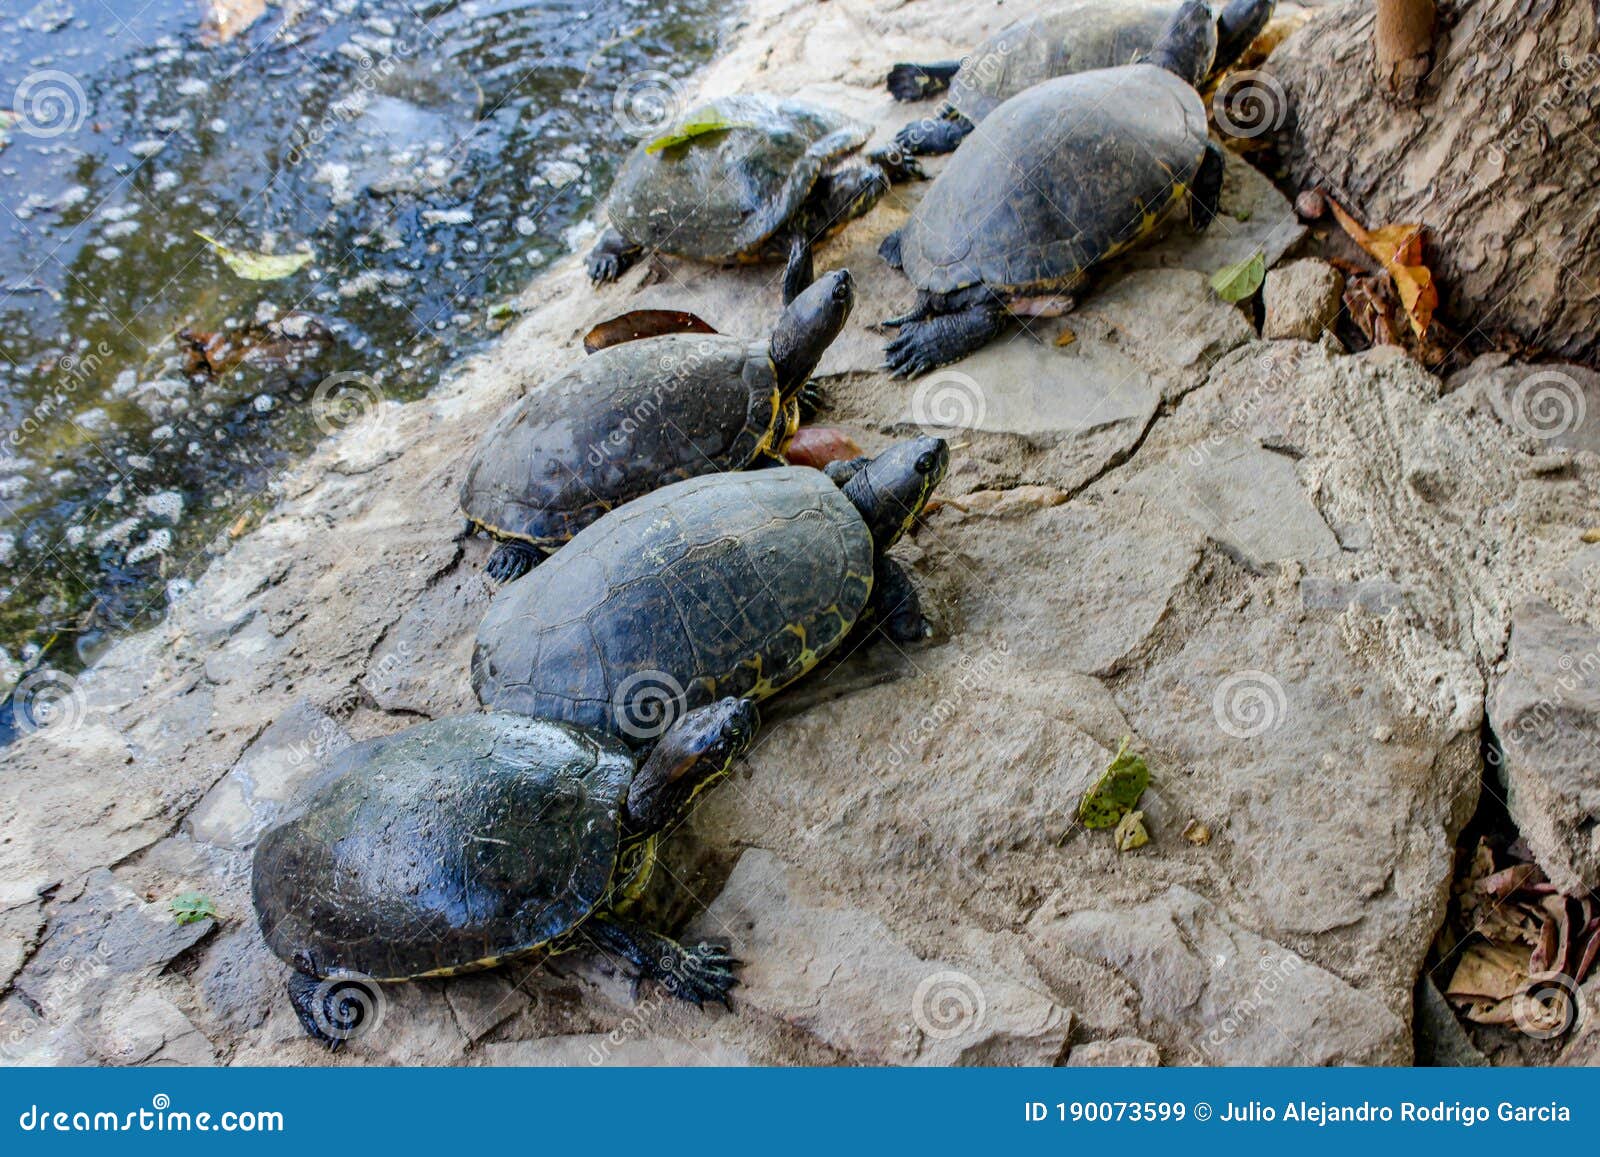 turtle family on a rock.